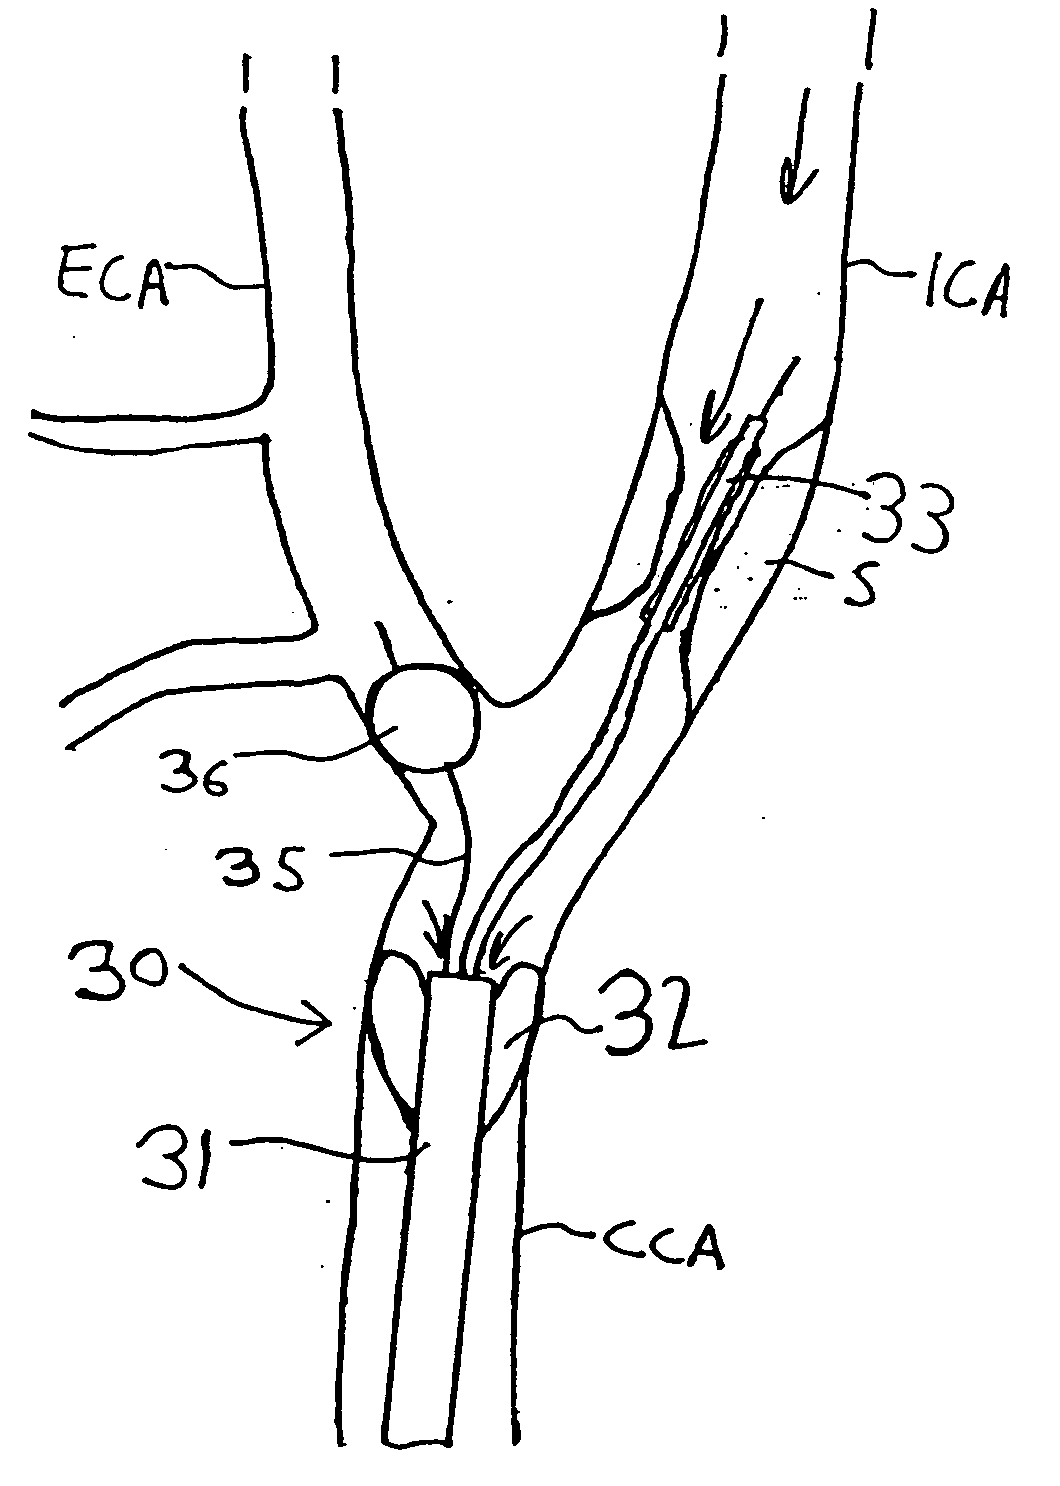 Apparatus and methods for reducing embolization during treatment of carotid artery disease